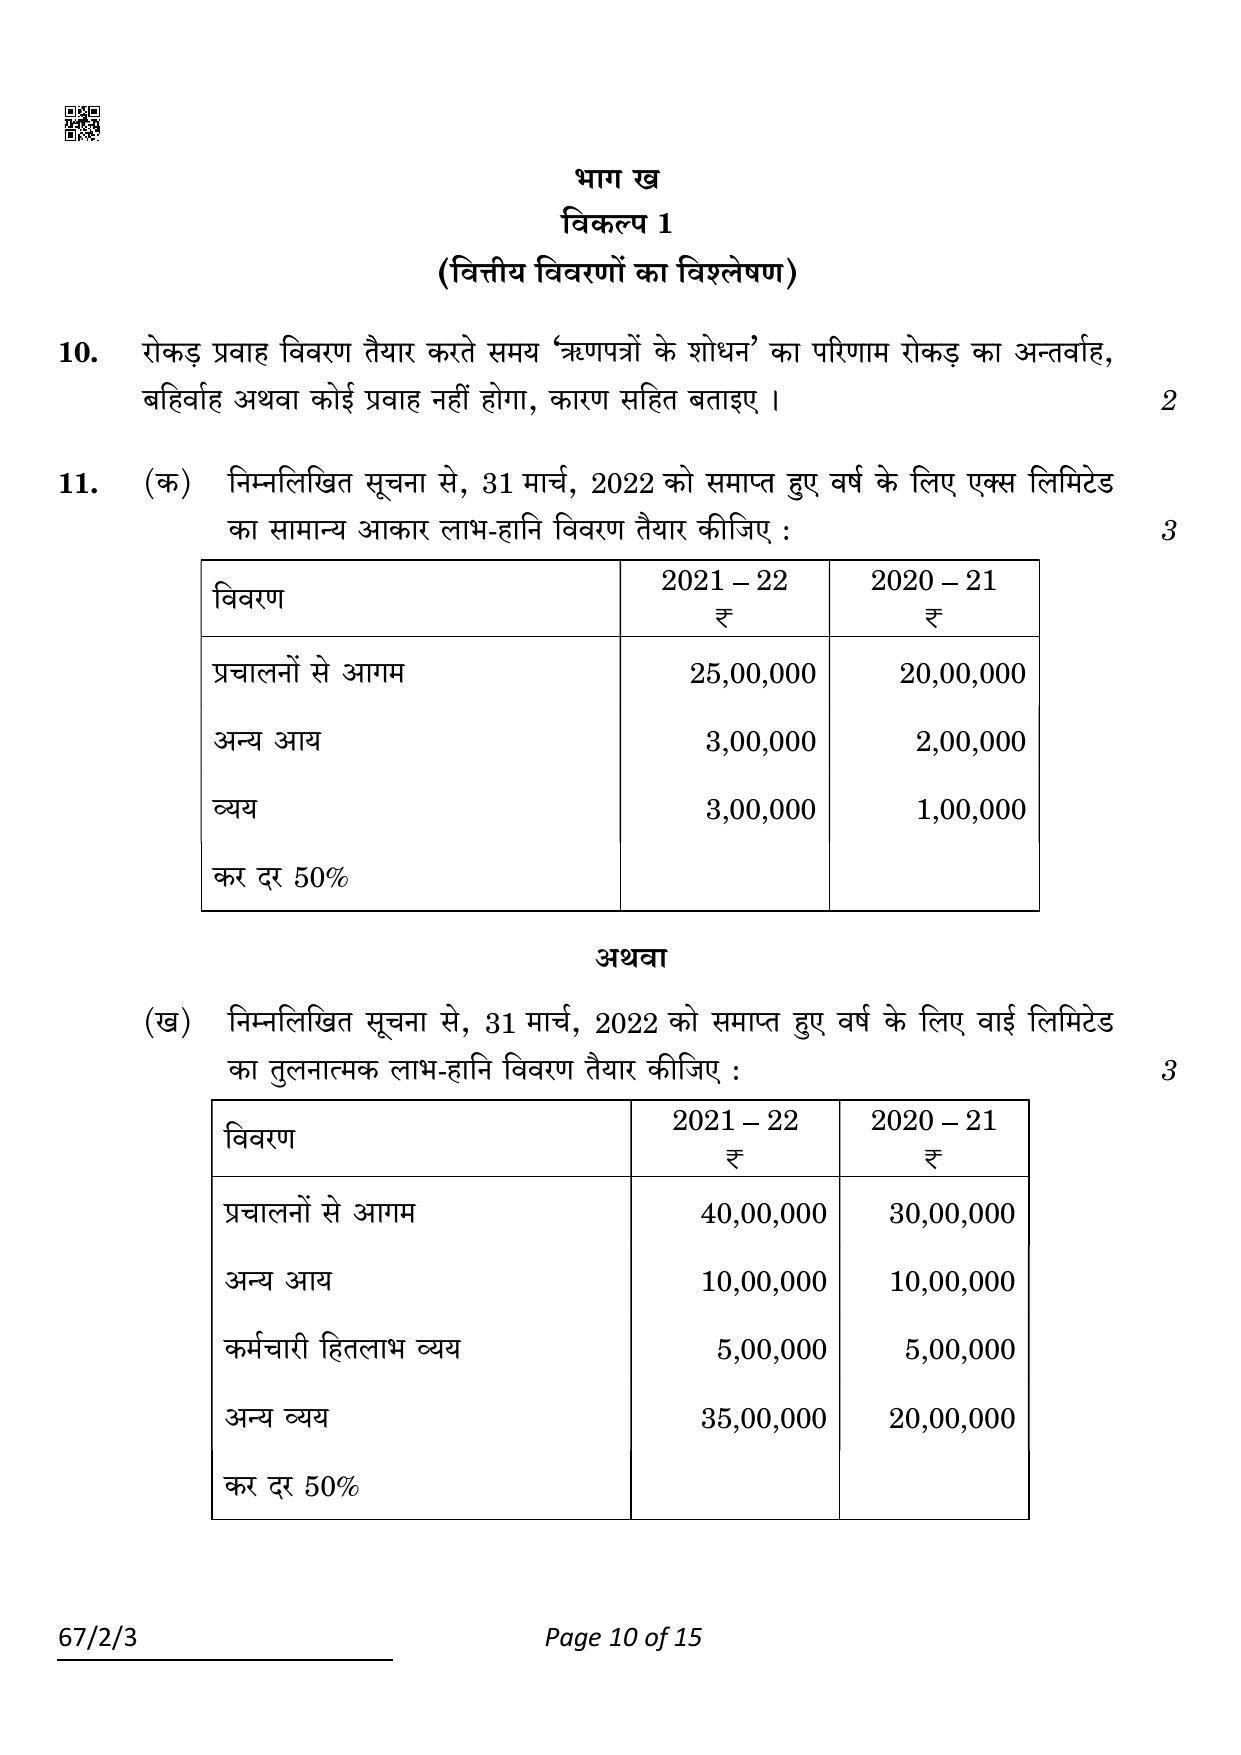 CBSE Class 12 67-2-3 Accountancy 2022 Question Paper - Page 10